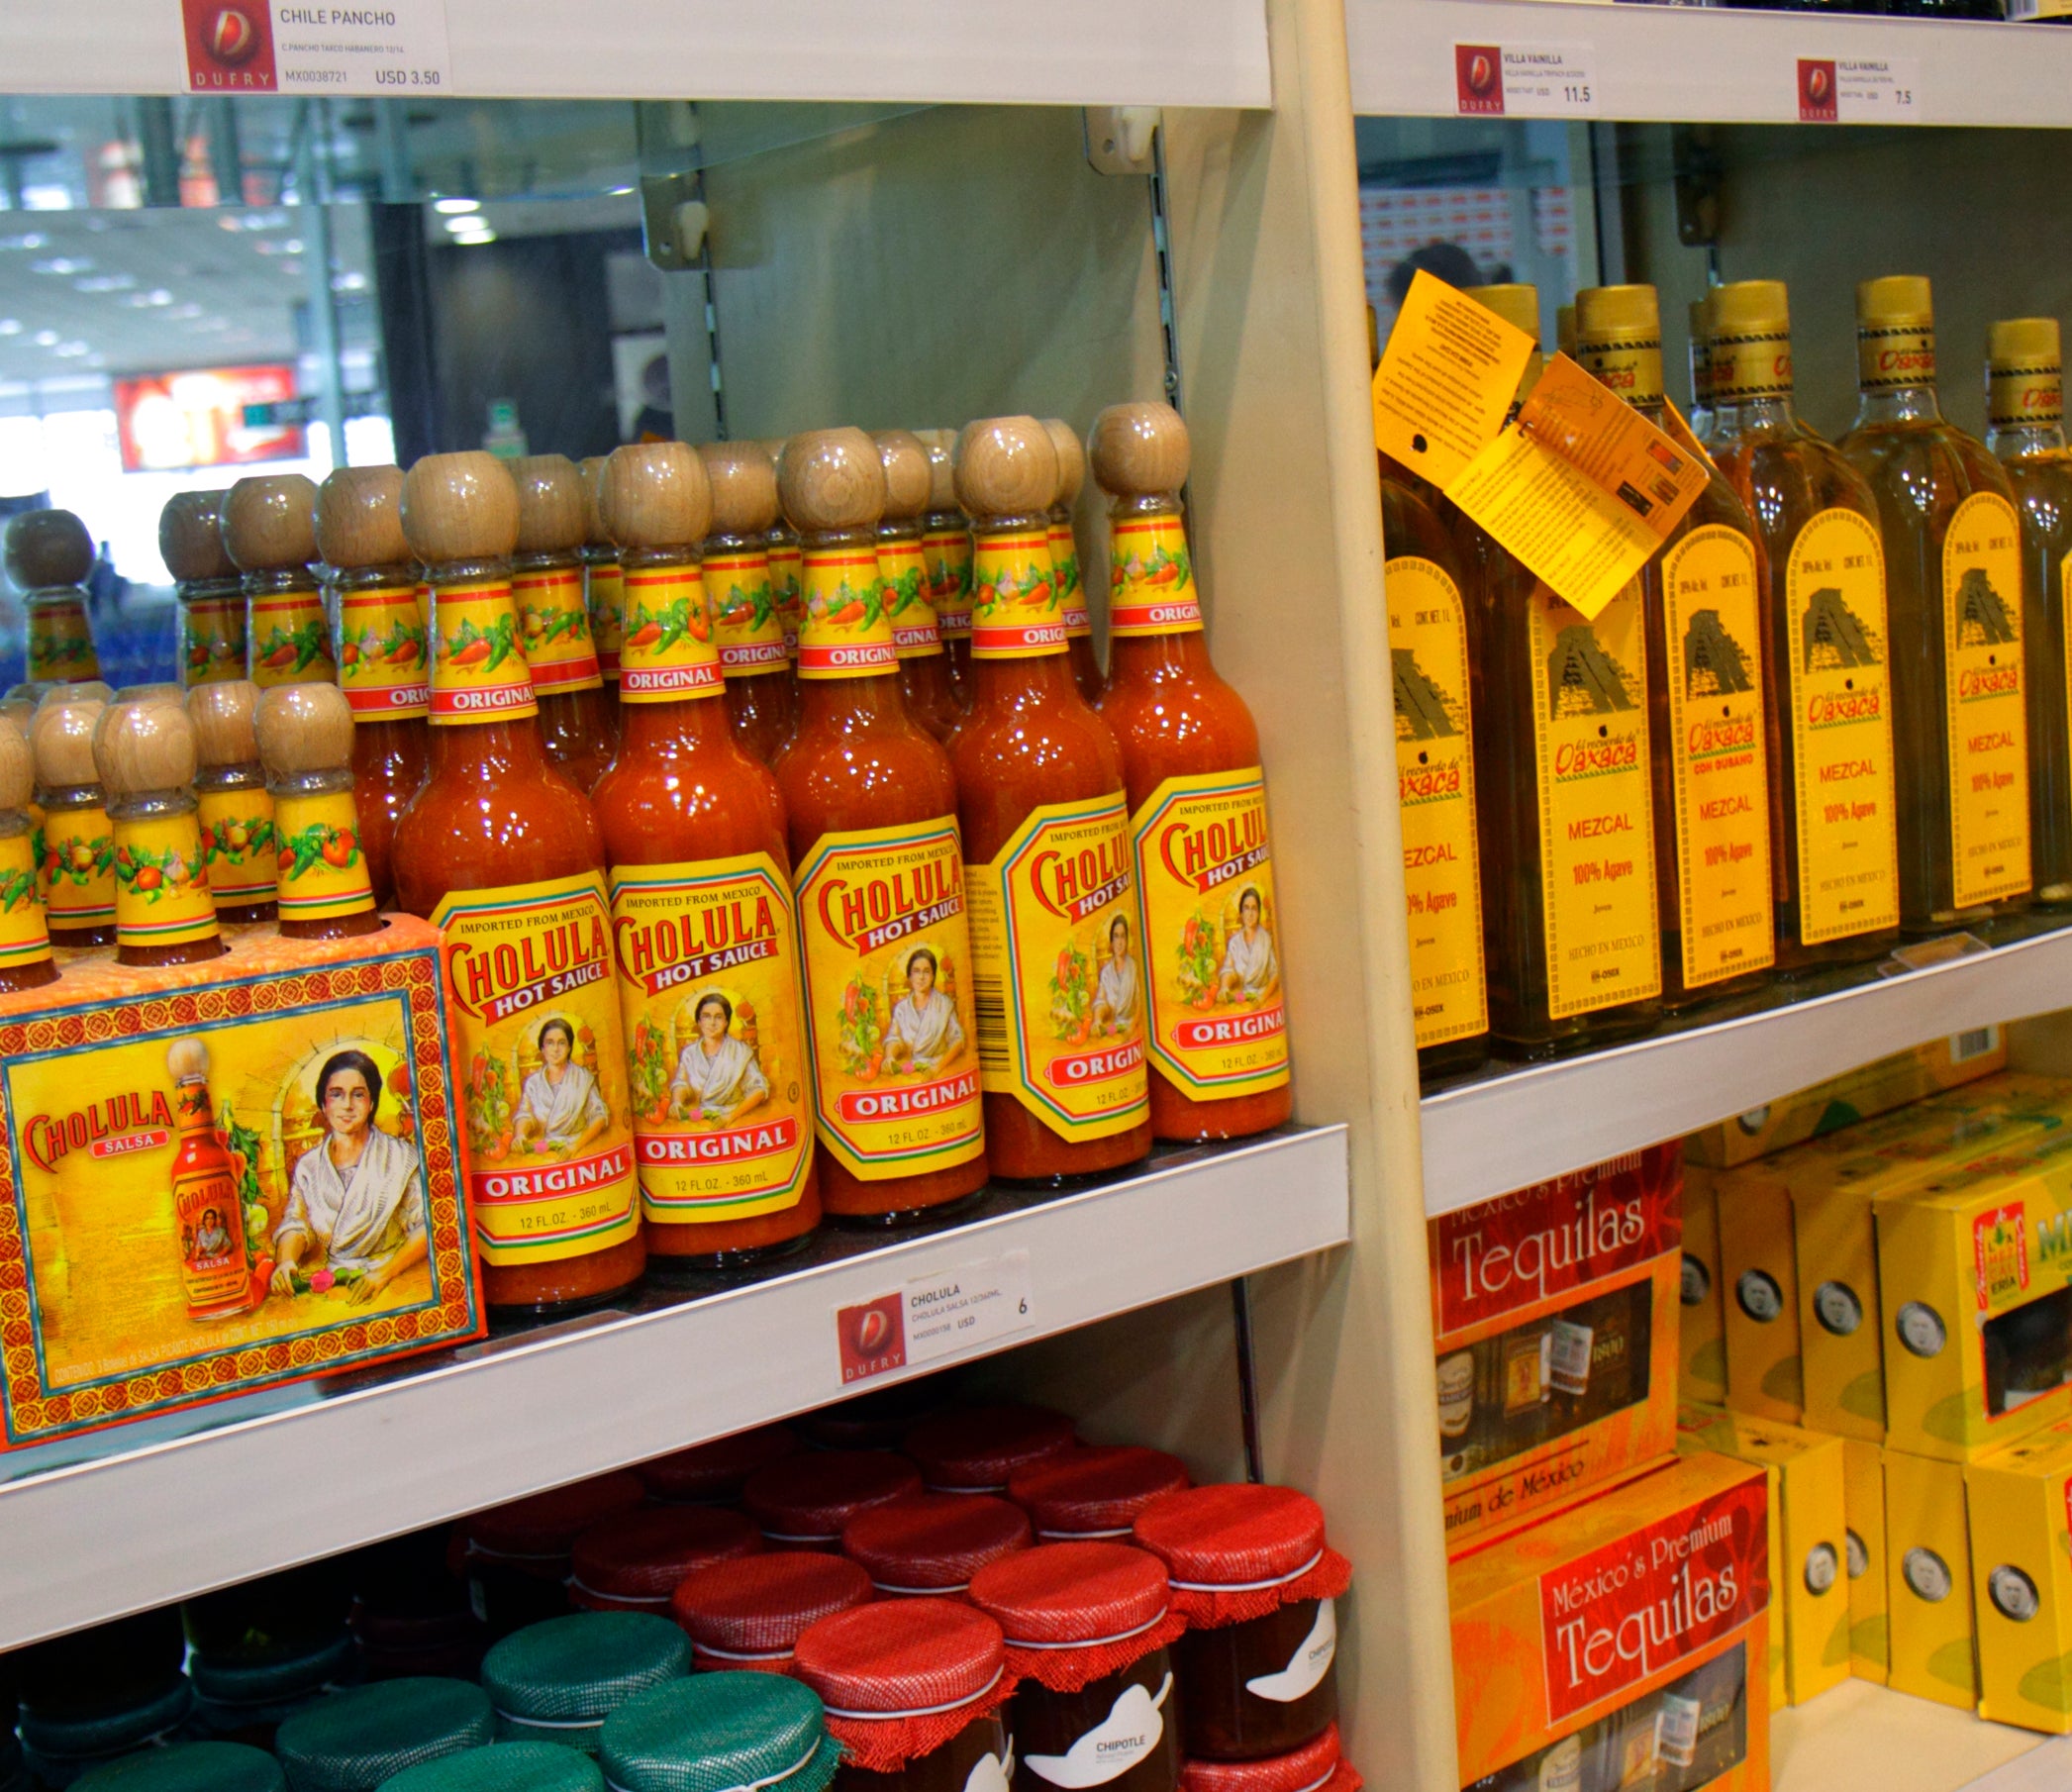 Cholula hot sauce on shelves in store